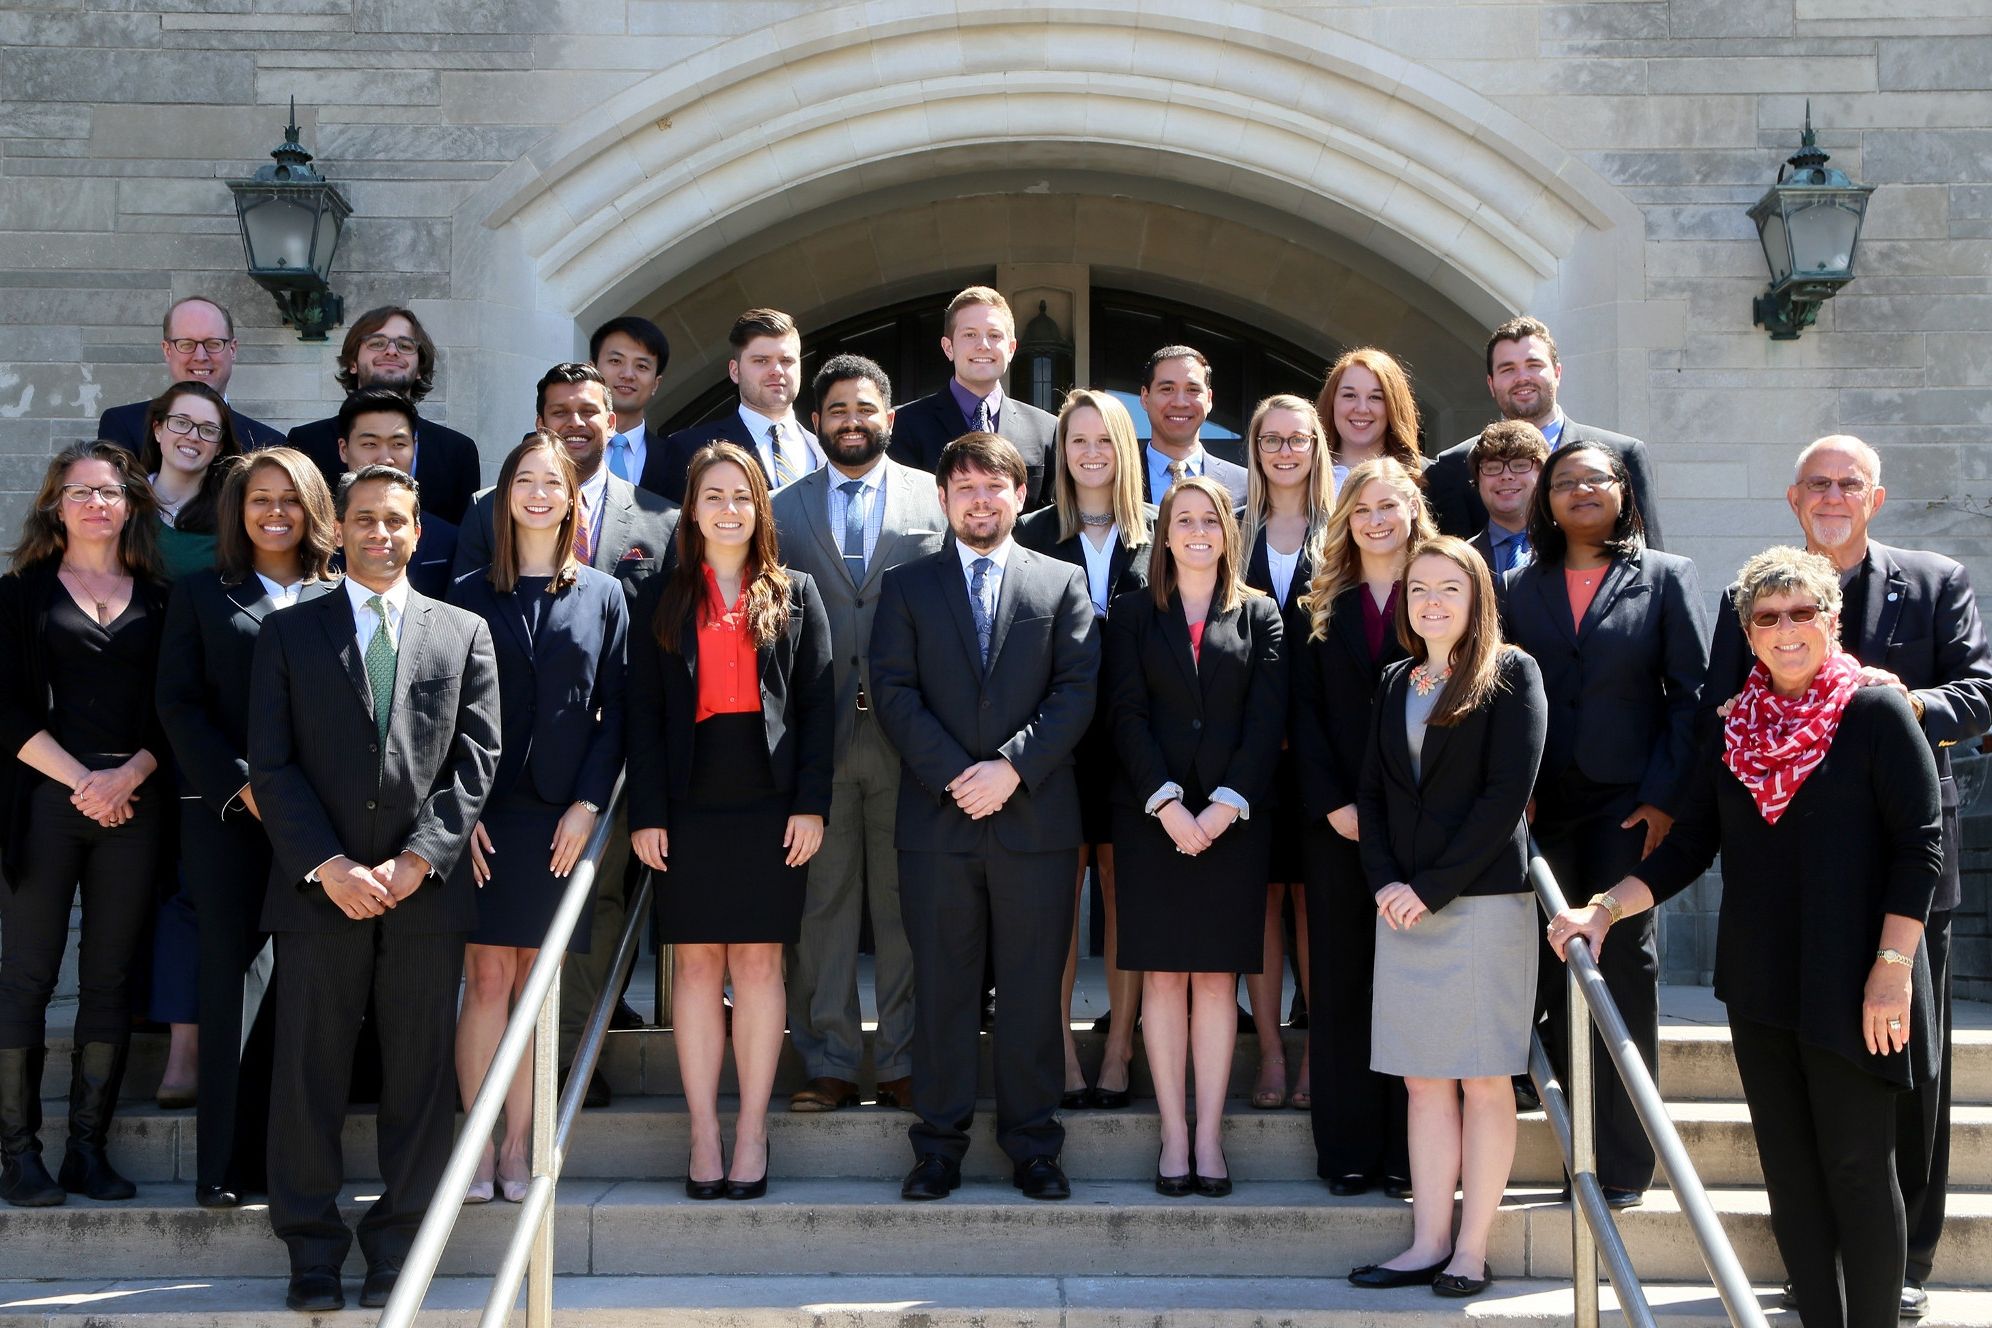 Stewart fellows pose together outside of a Maurer School of Law building.